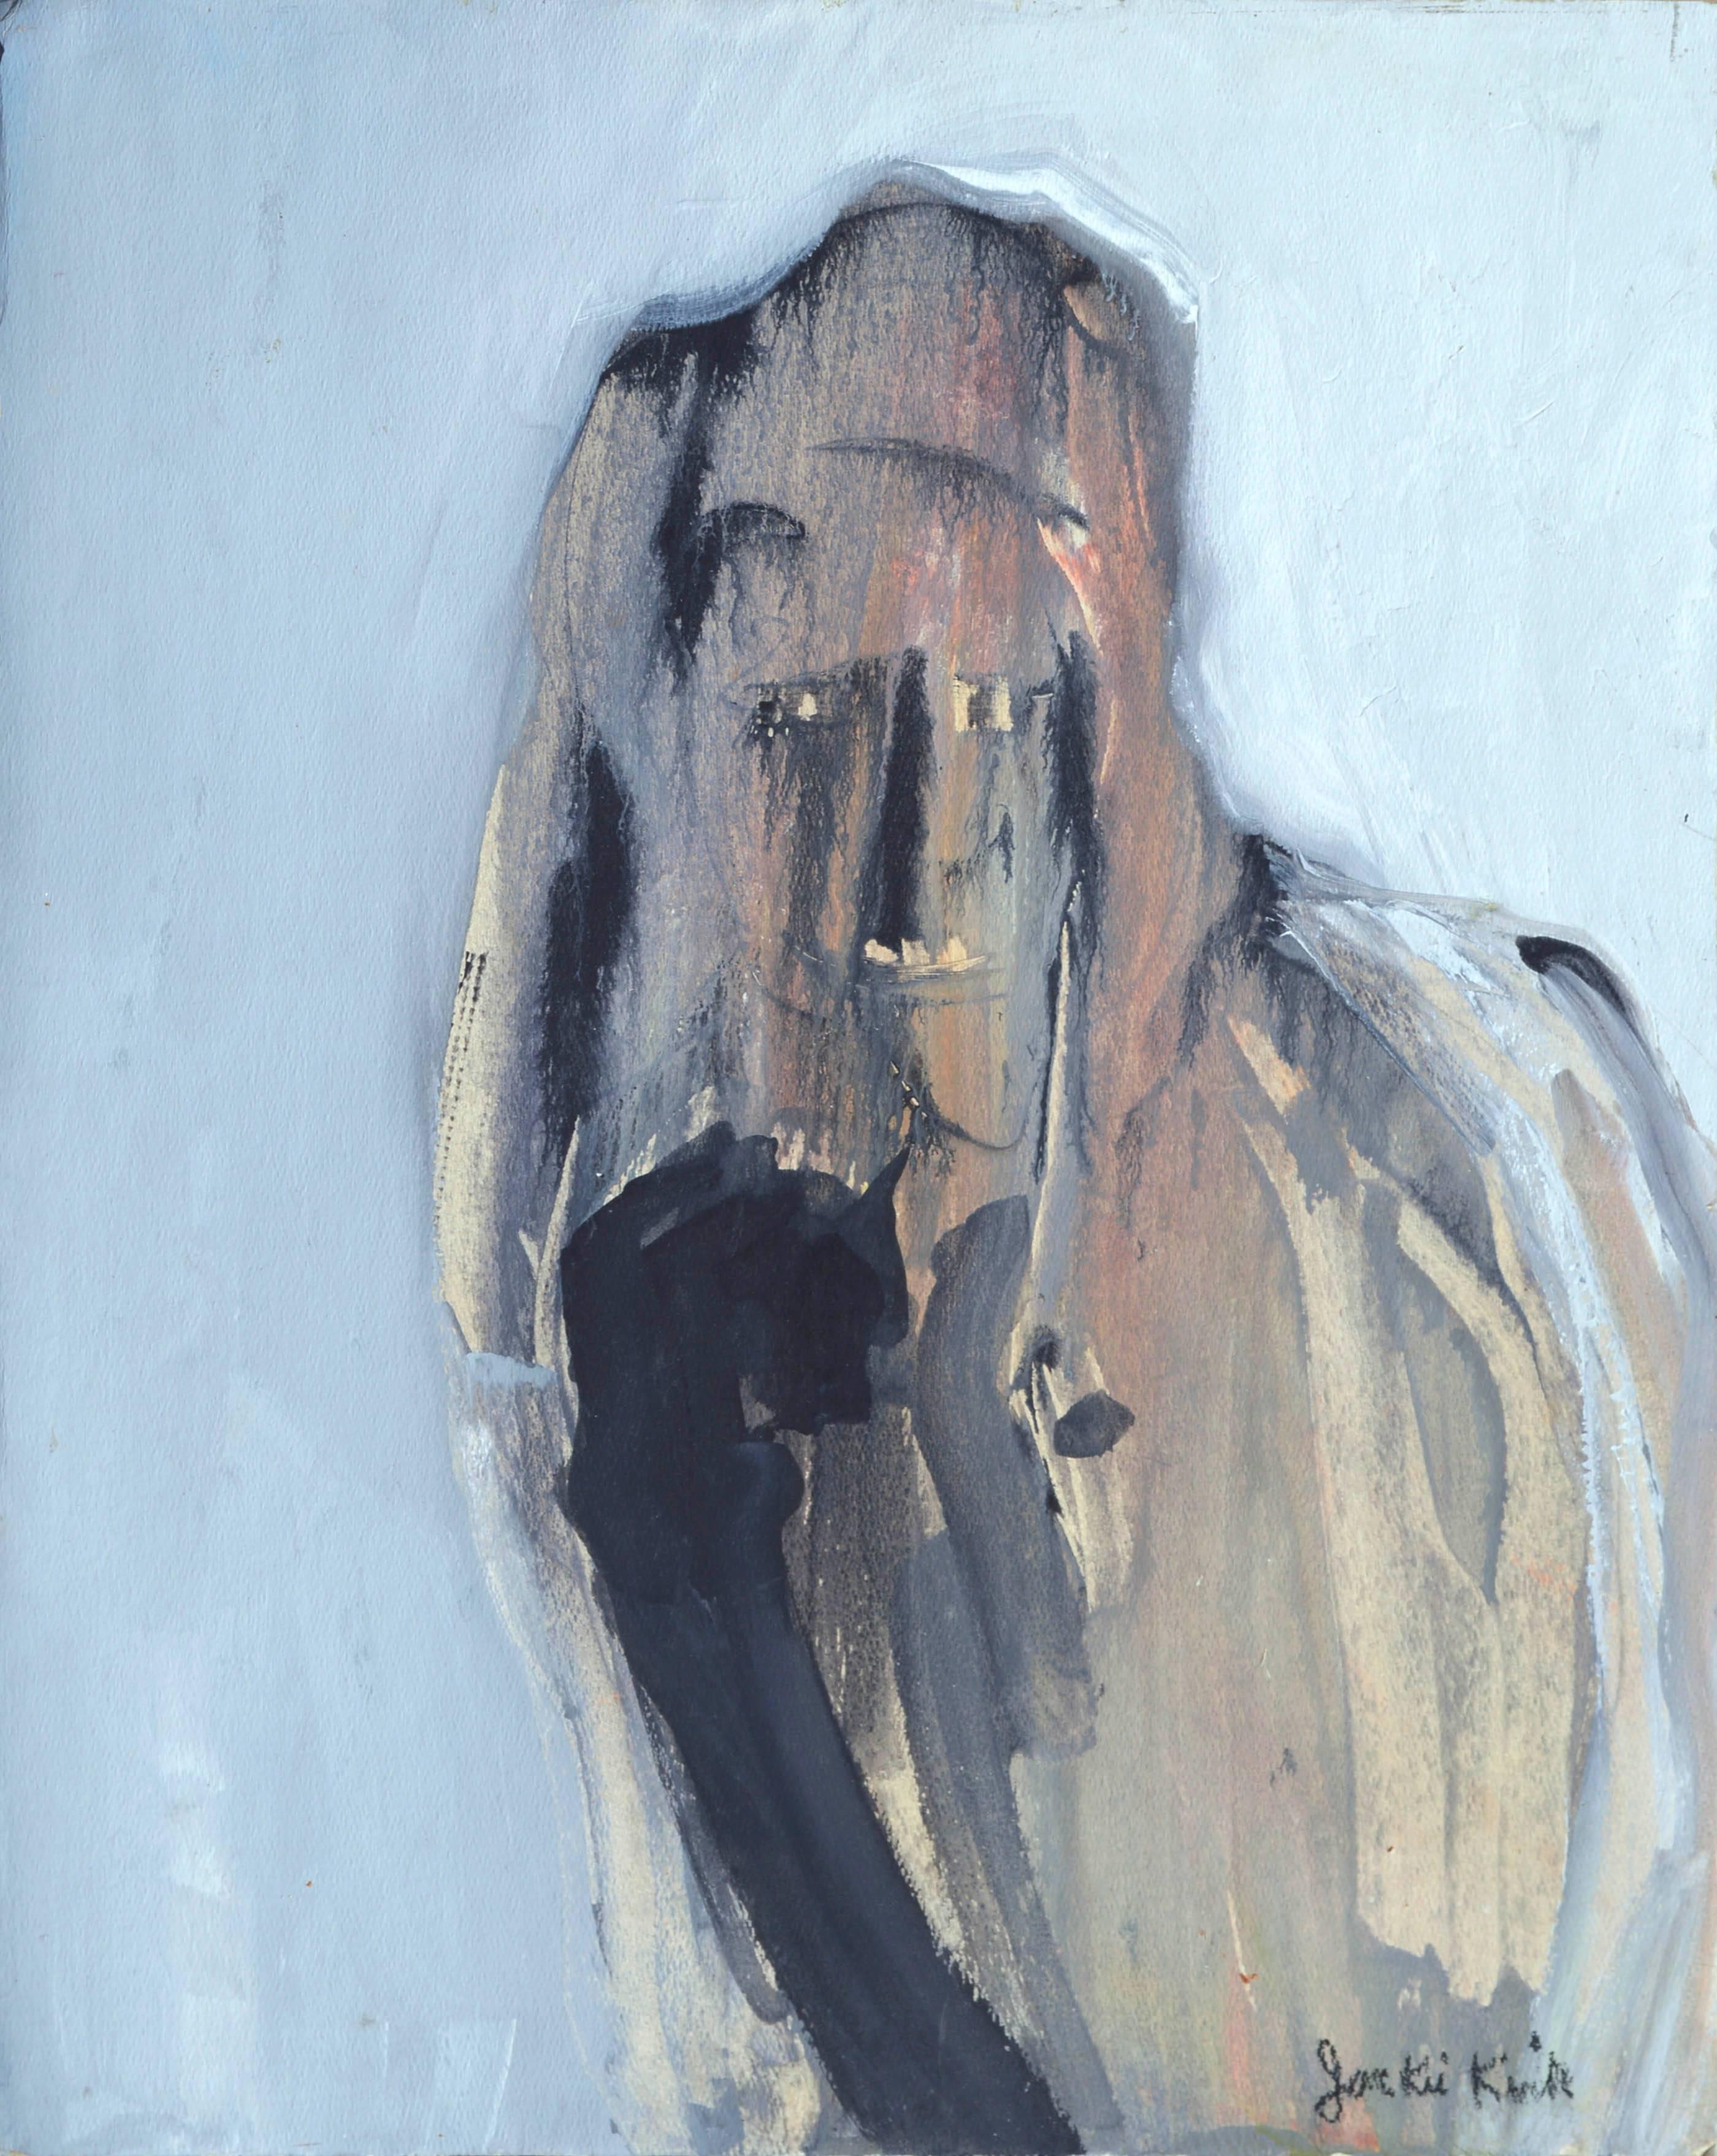 Jacqueline (Jackie) Kirk Figurative Painting - Abstract Expressionist Figurative